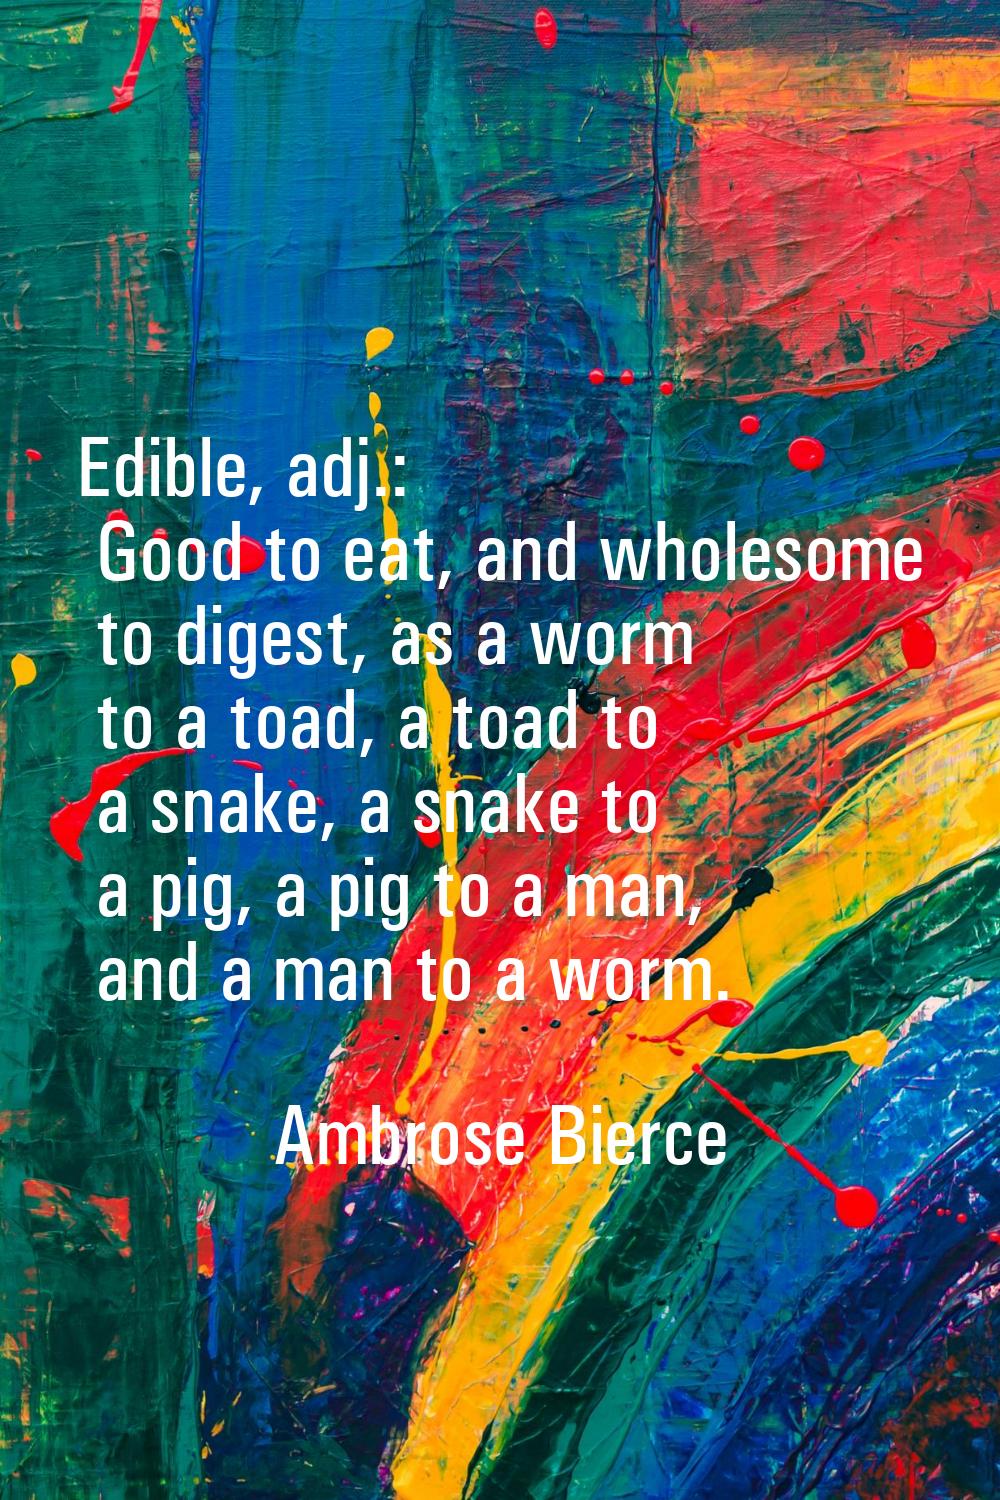 Edible, adj.: Good to eat, and wholesome to digest, as a worm to a toad, a toad to a snake, a snake